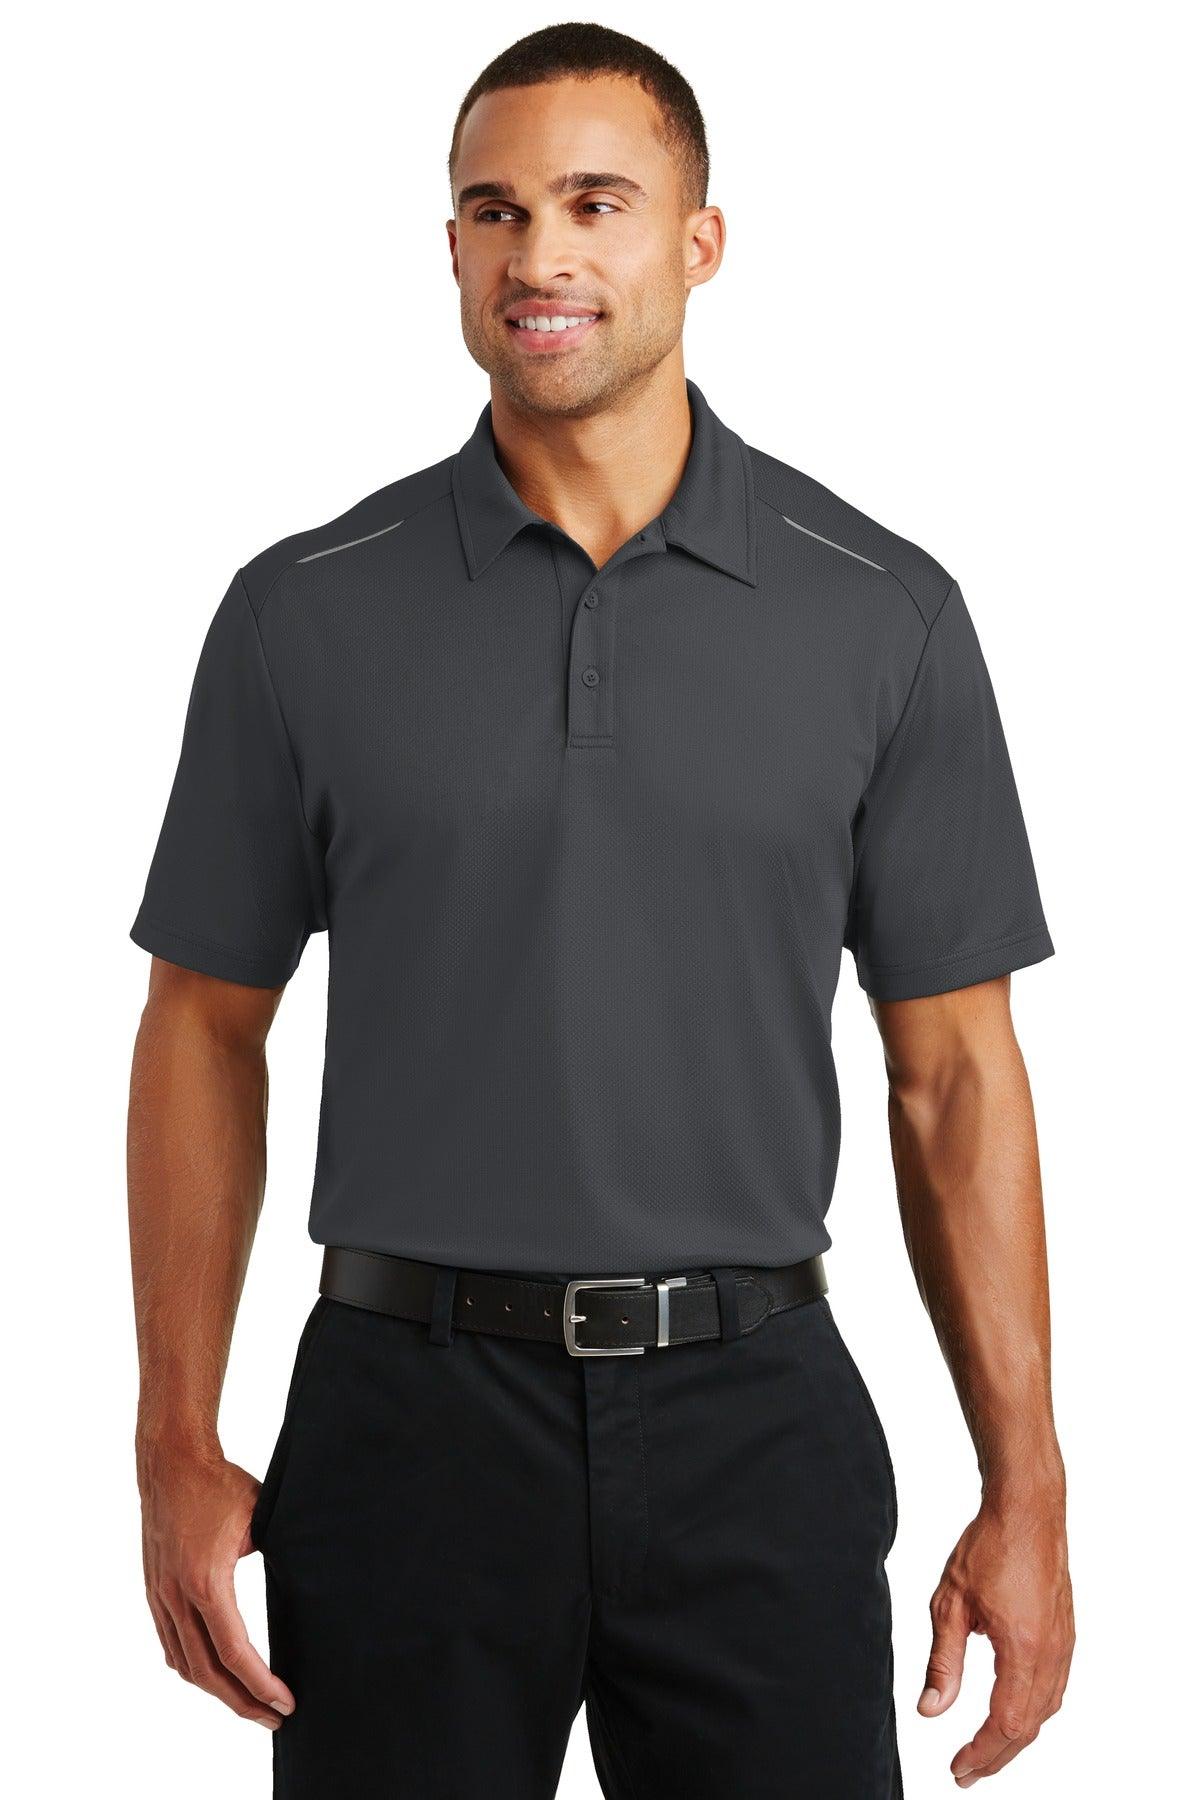 Port Authority Pinpoint Mesh Polo. K580 - Dresses Max